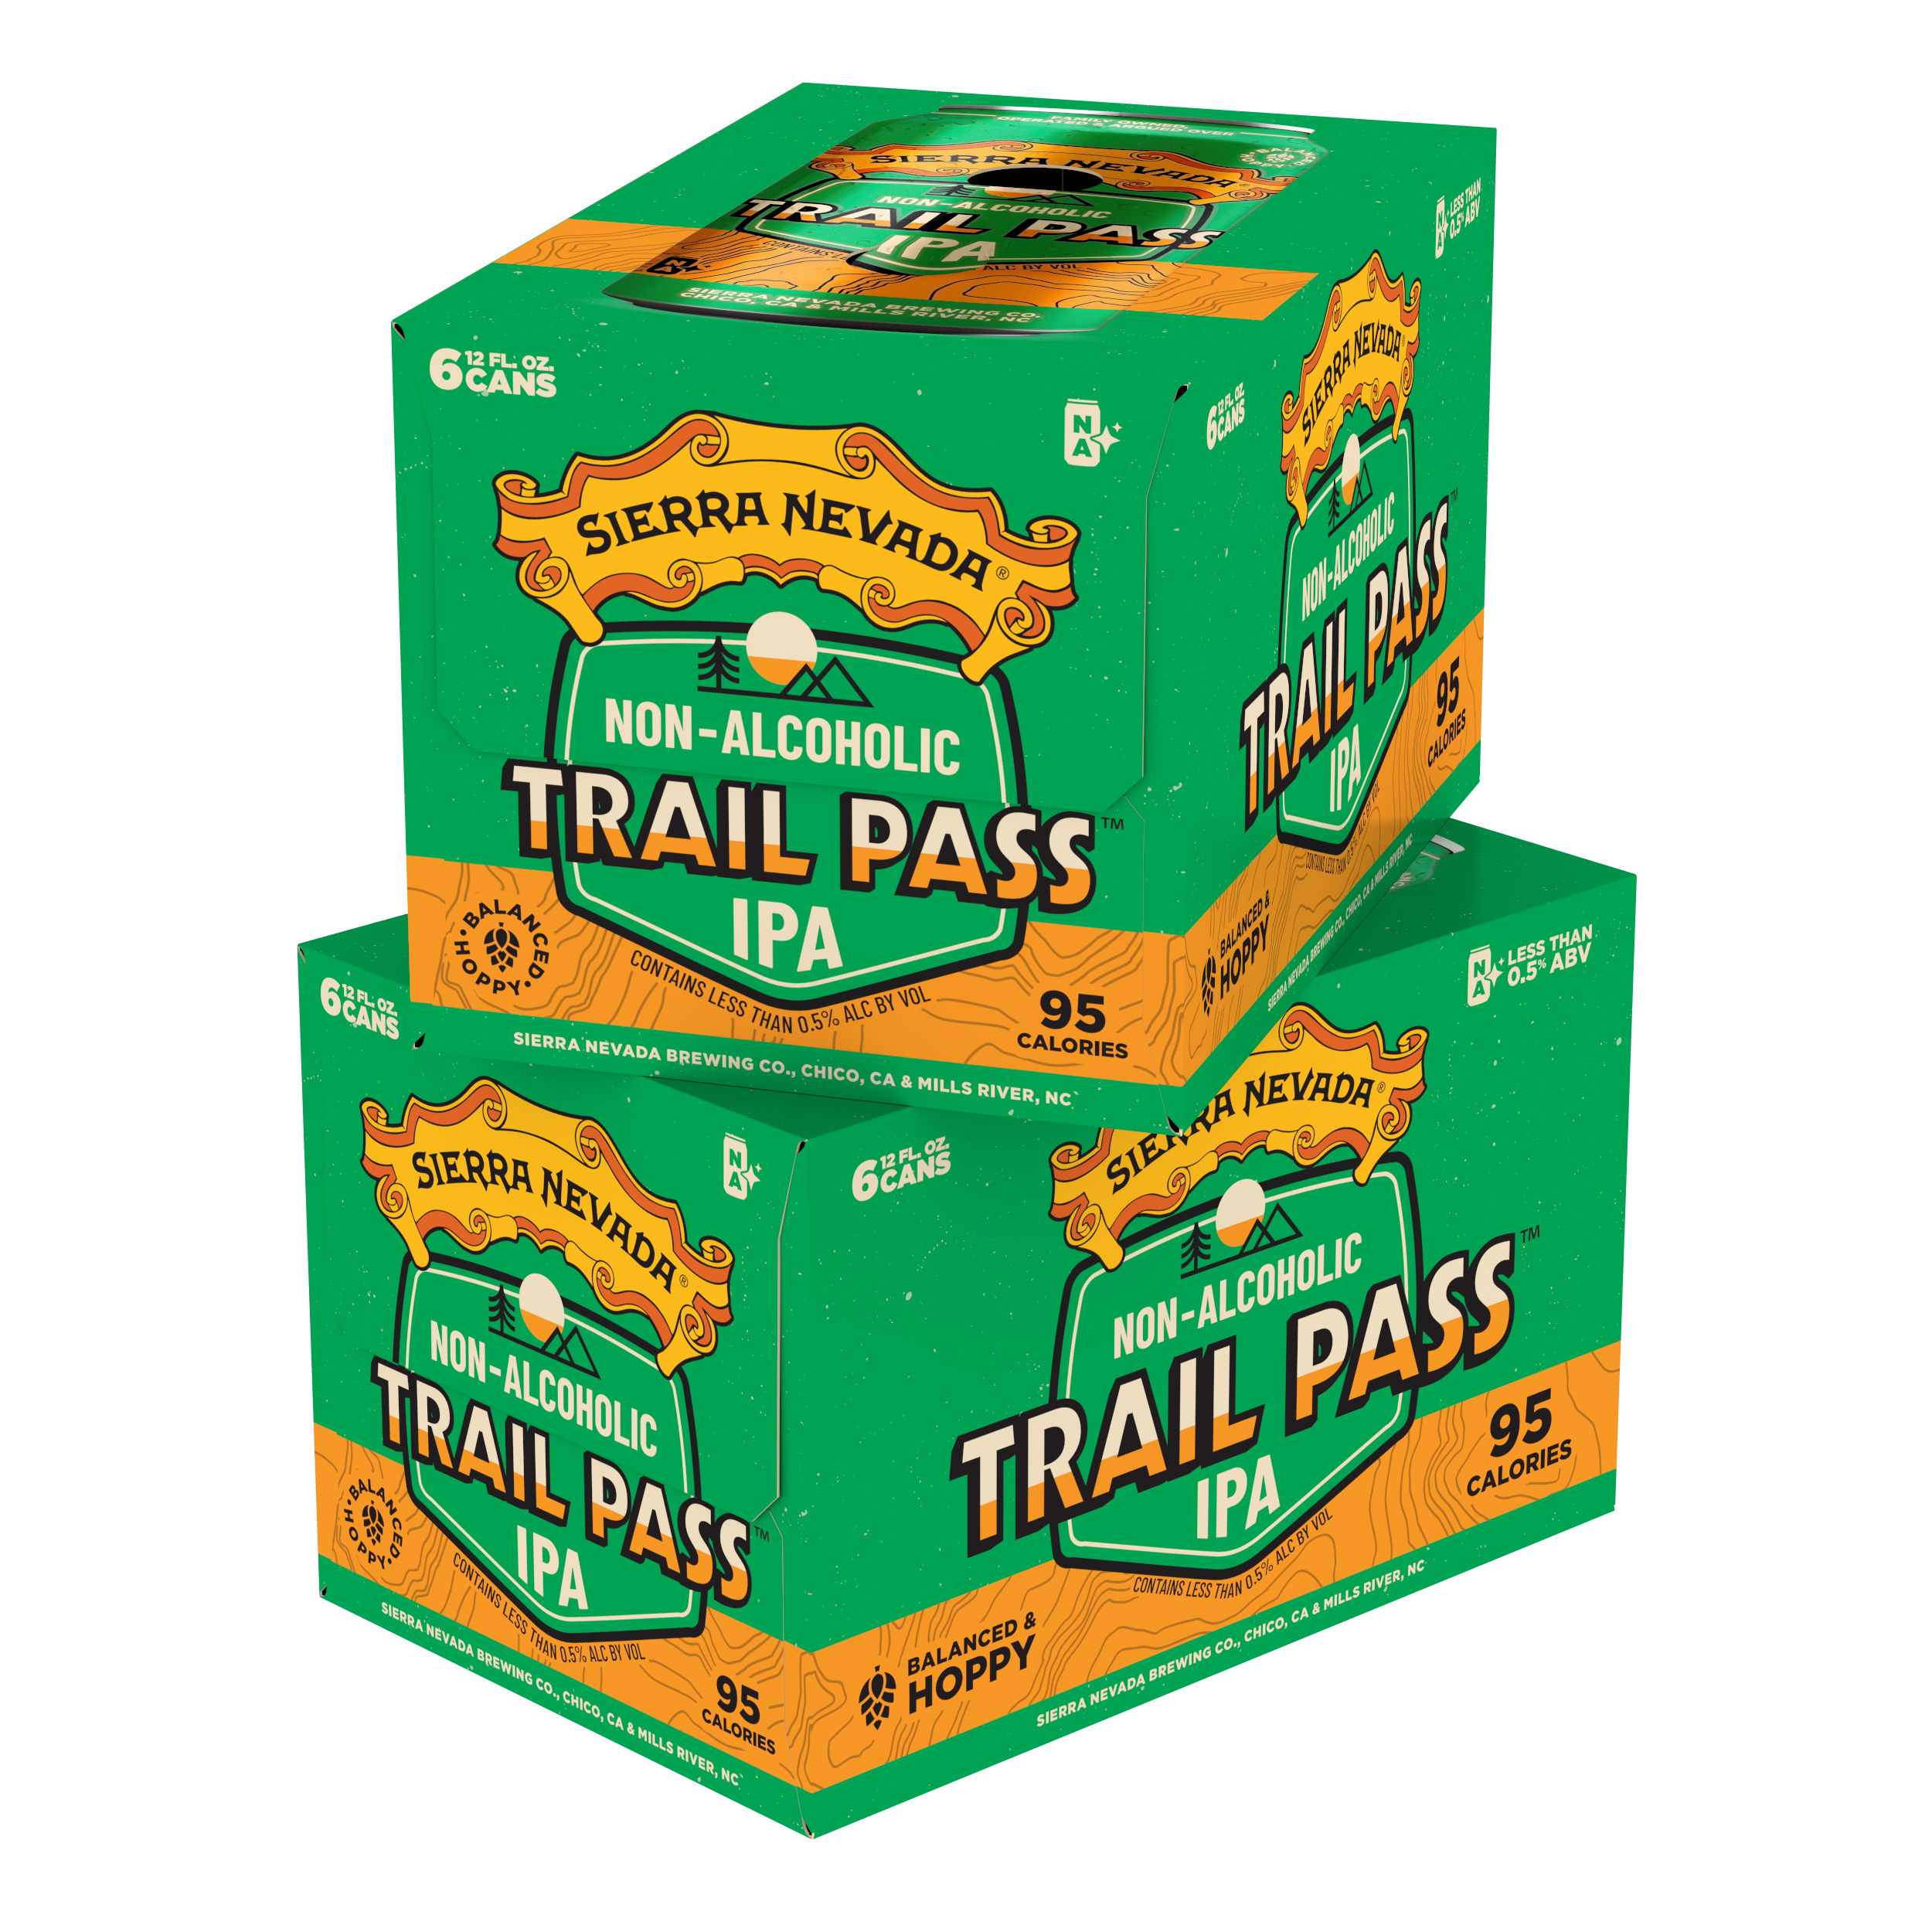 Sierra Nevada Brewing Co. Trail Pass IPA Non-Alcoholic Brew - 12 Pack